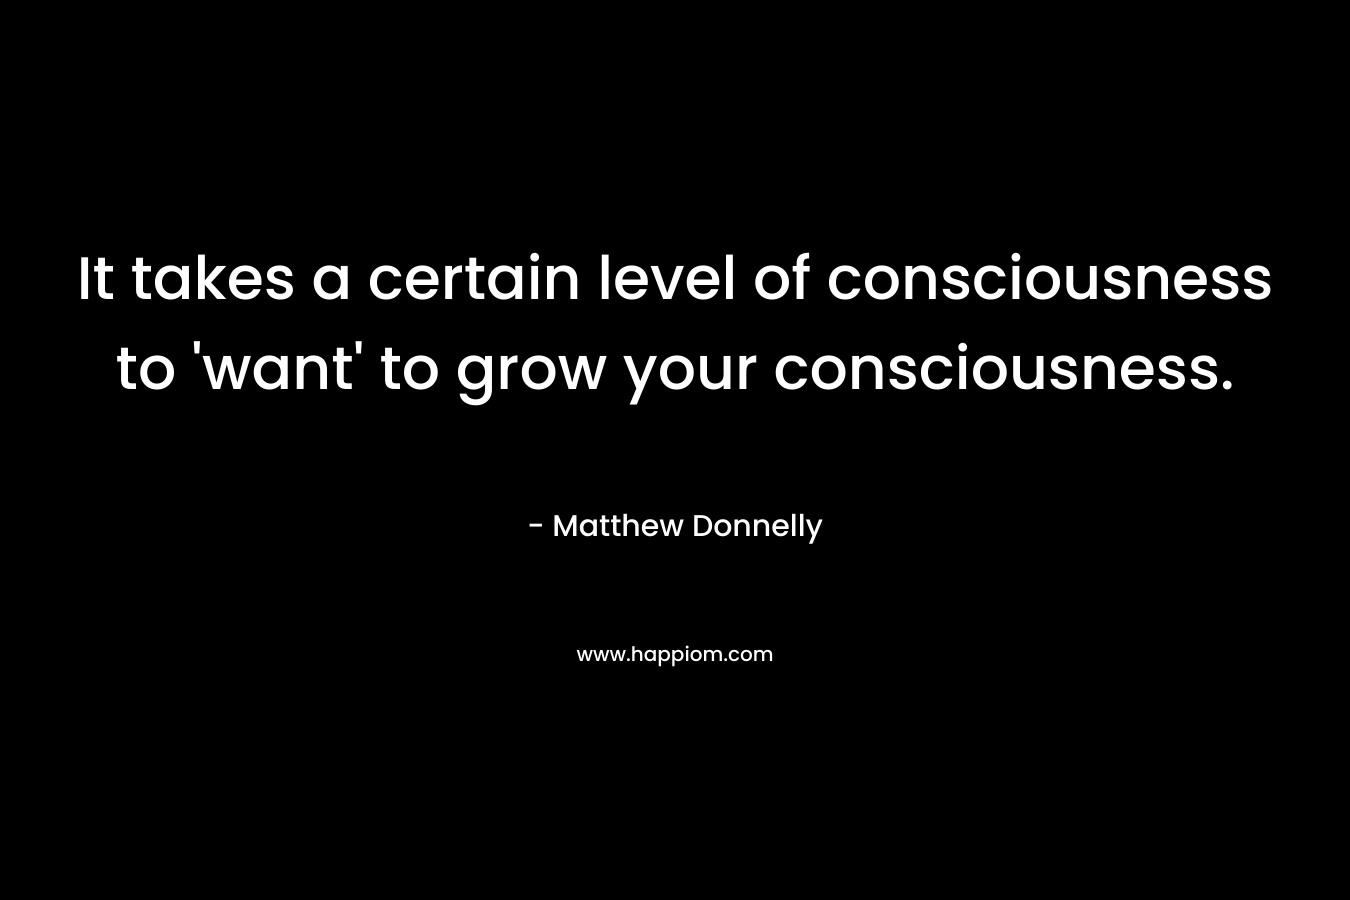 It takes a certain level of consciousness to 'want' to grow your consciousness.